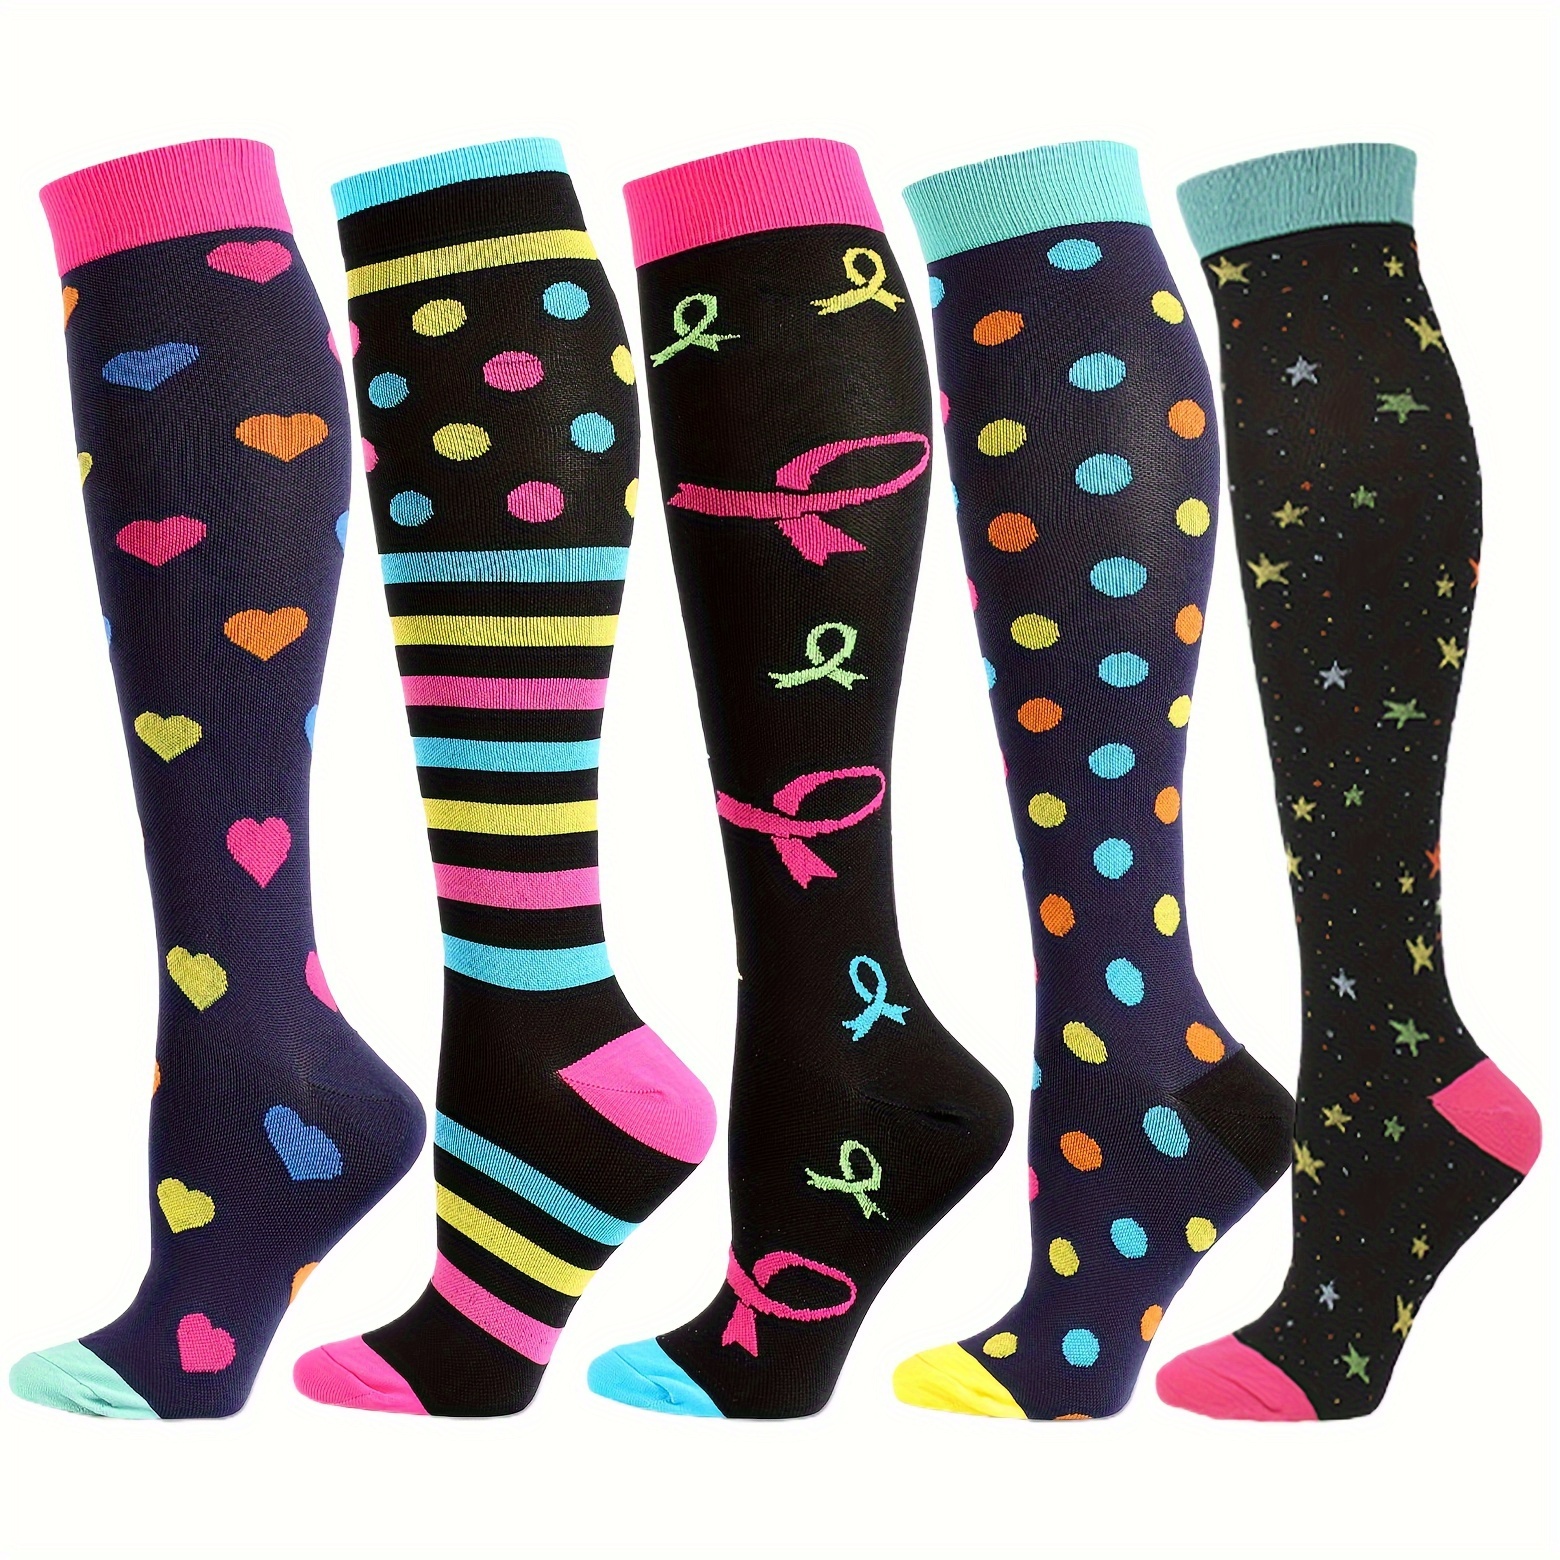 

5 Pairs Compression Socks For Women - Knee High Long Socks For Sport Running Cycling Sporty